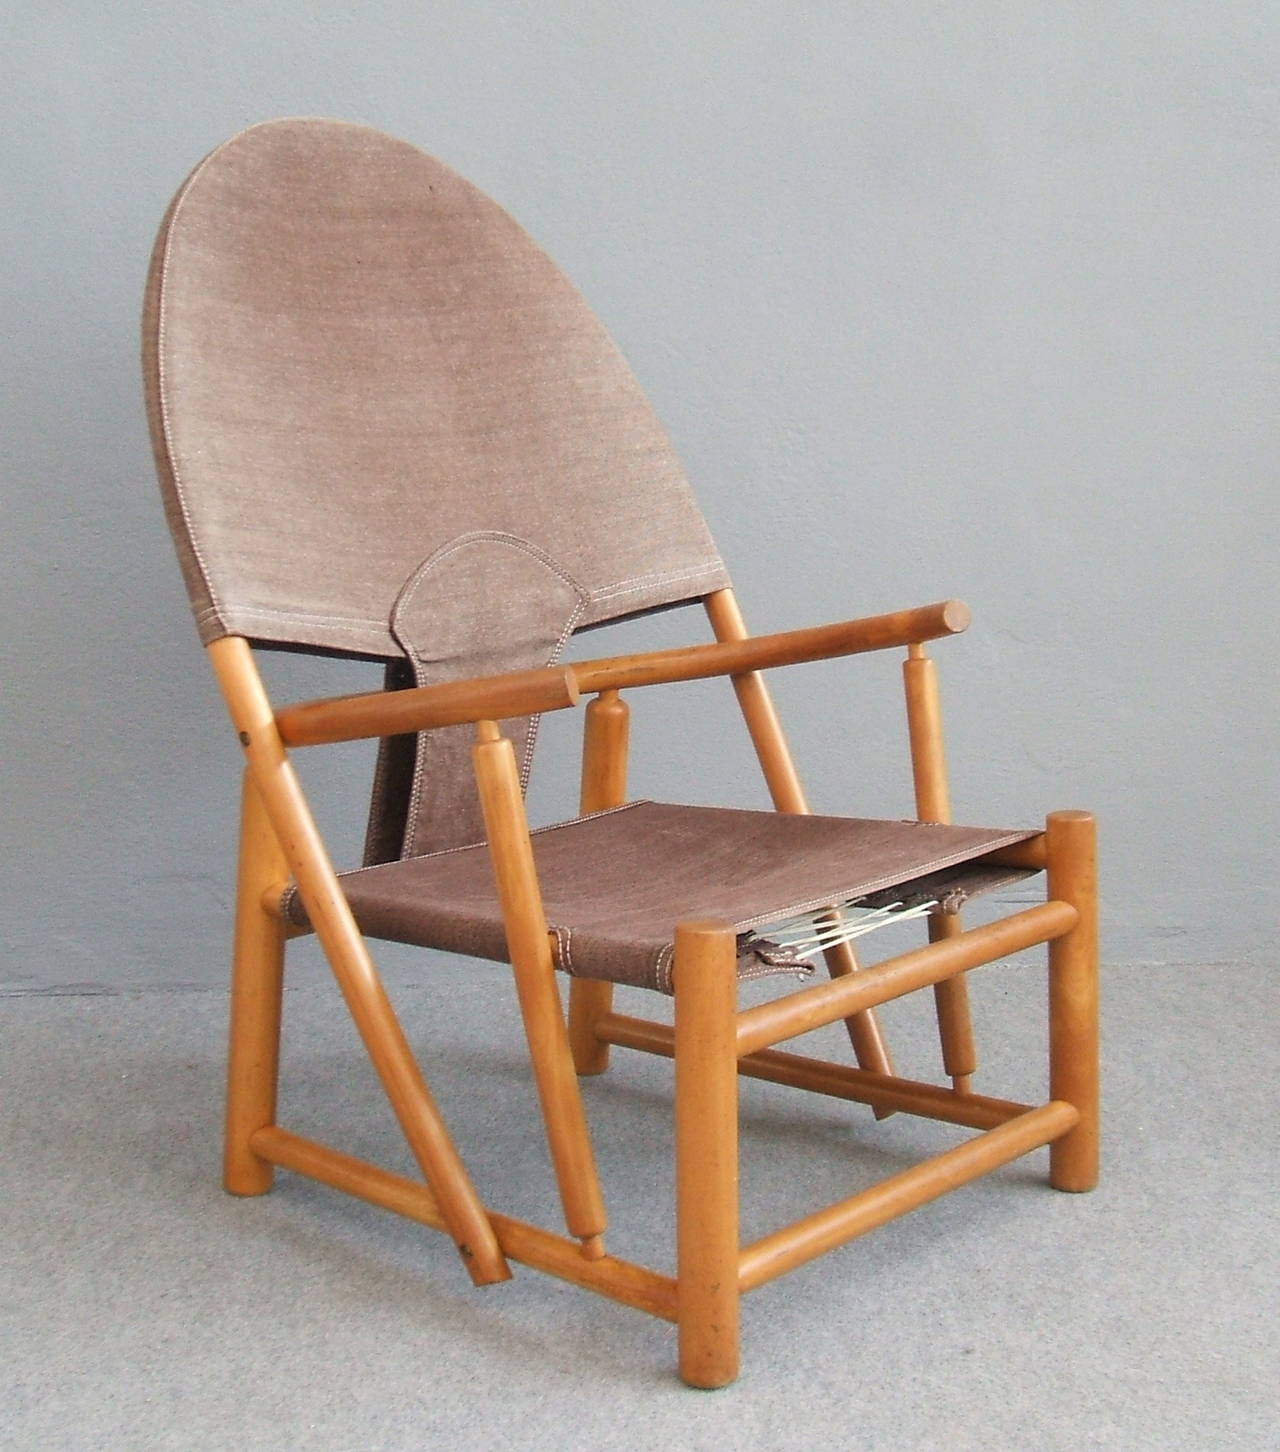 Nice lounge chair designed by Toffoloni, with original upholstering.